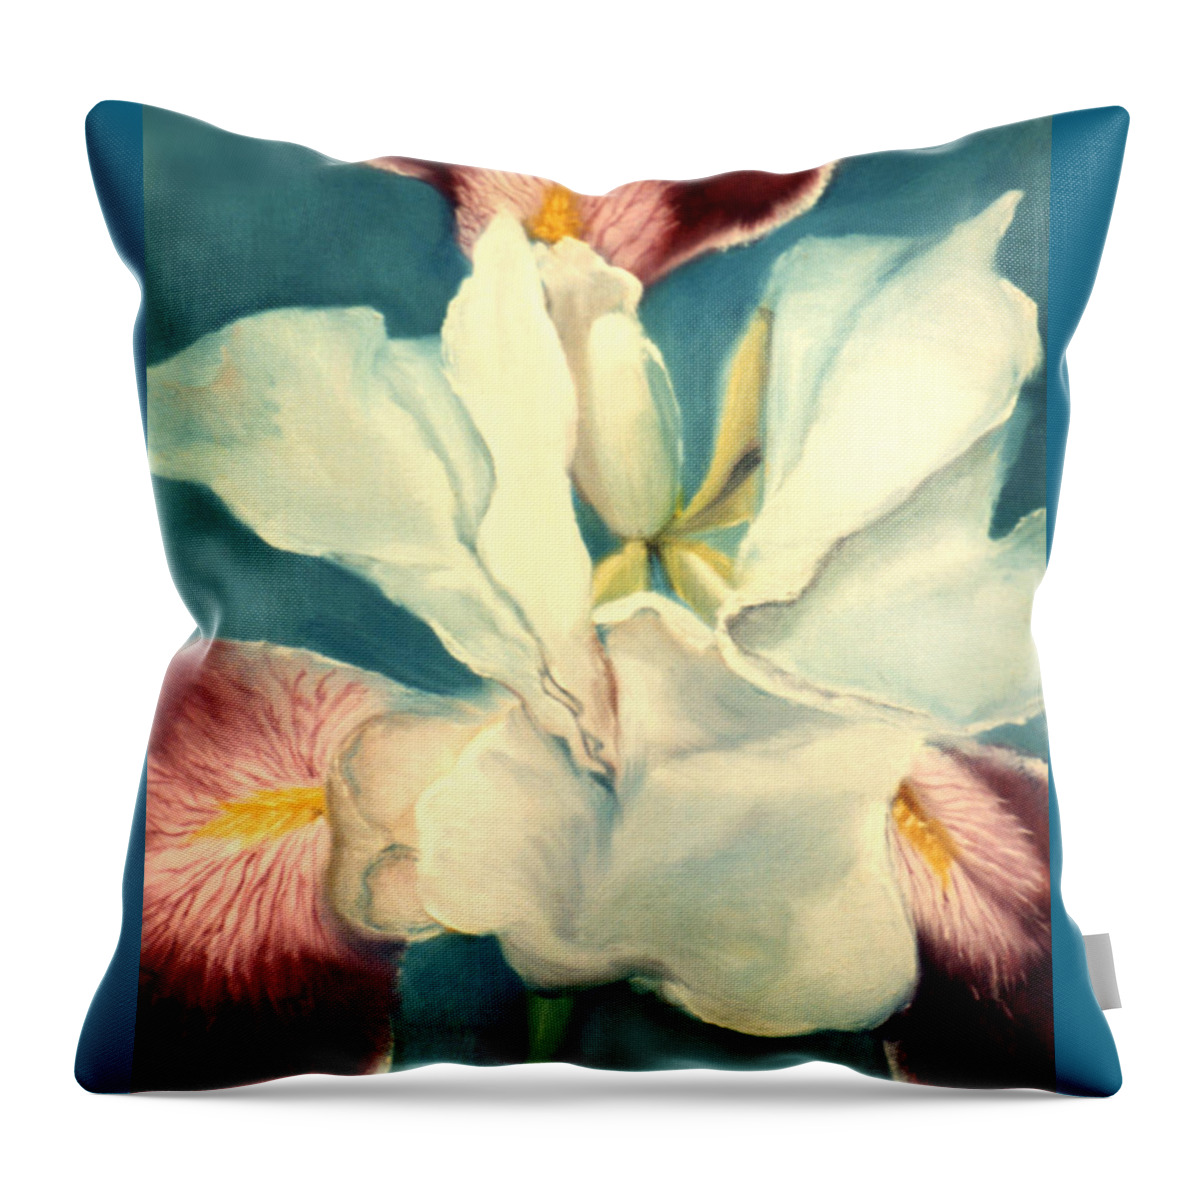 Flowers Throw Pillow featuring the painting White Iris by Anni Adkins